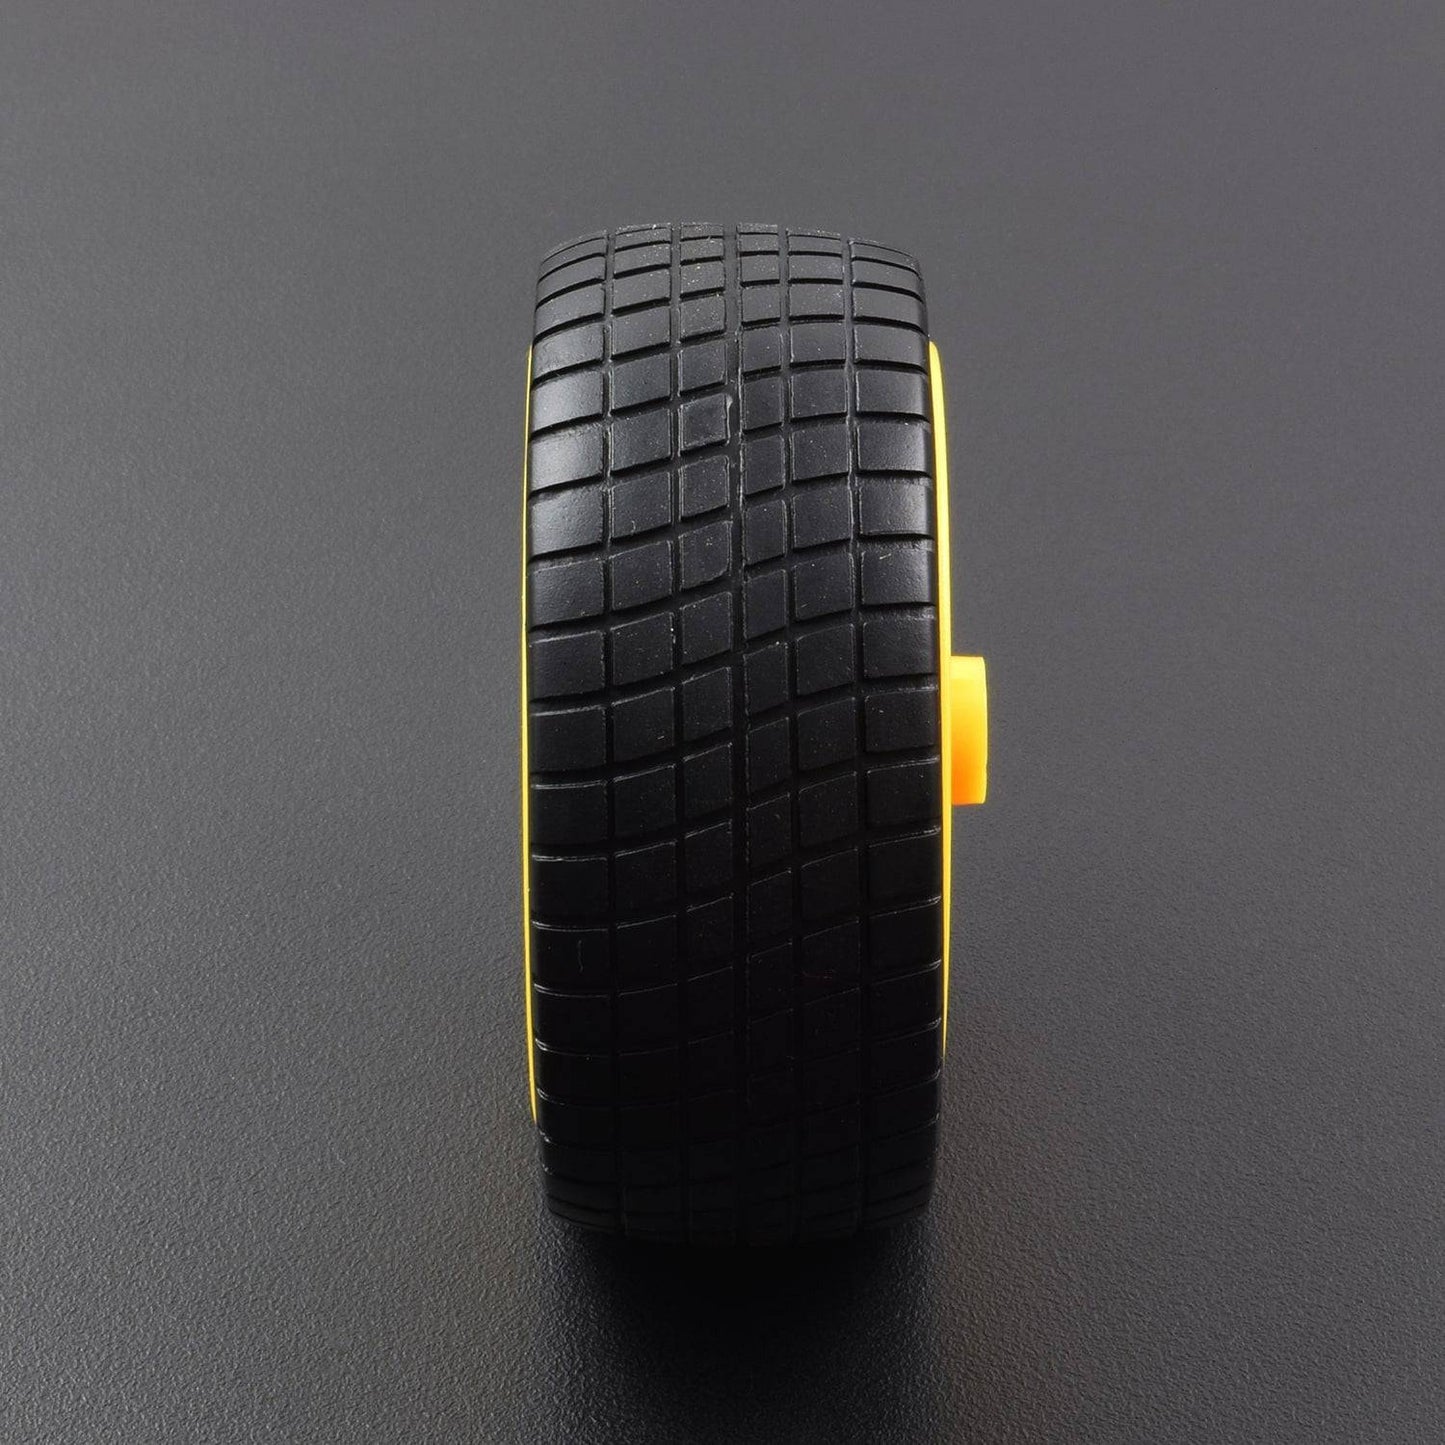 Smart Robot Car Tyres Wheels For Arduino TT Gear Motor Chassis - RC022 - REES52